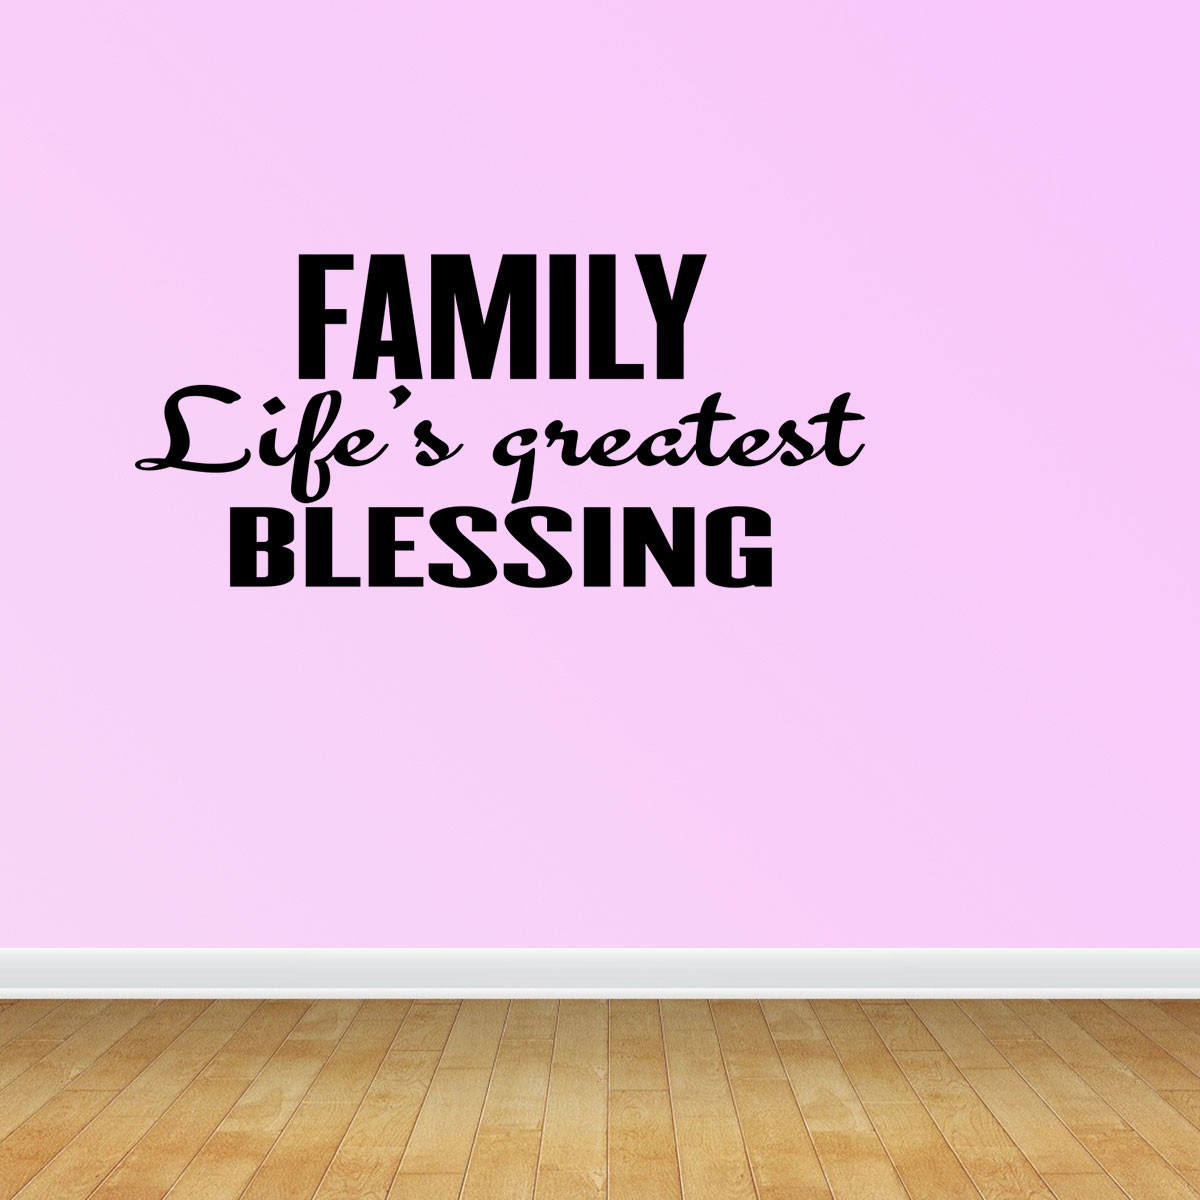 Family Blessings Quotes
 Family Life s Greatest Blessing Vinyl Wall Art Sayings